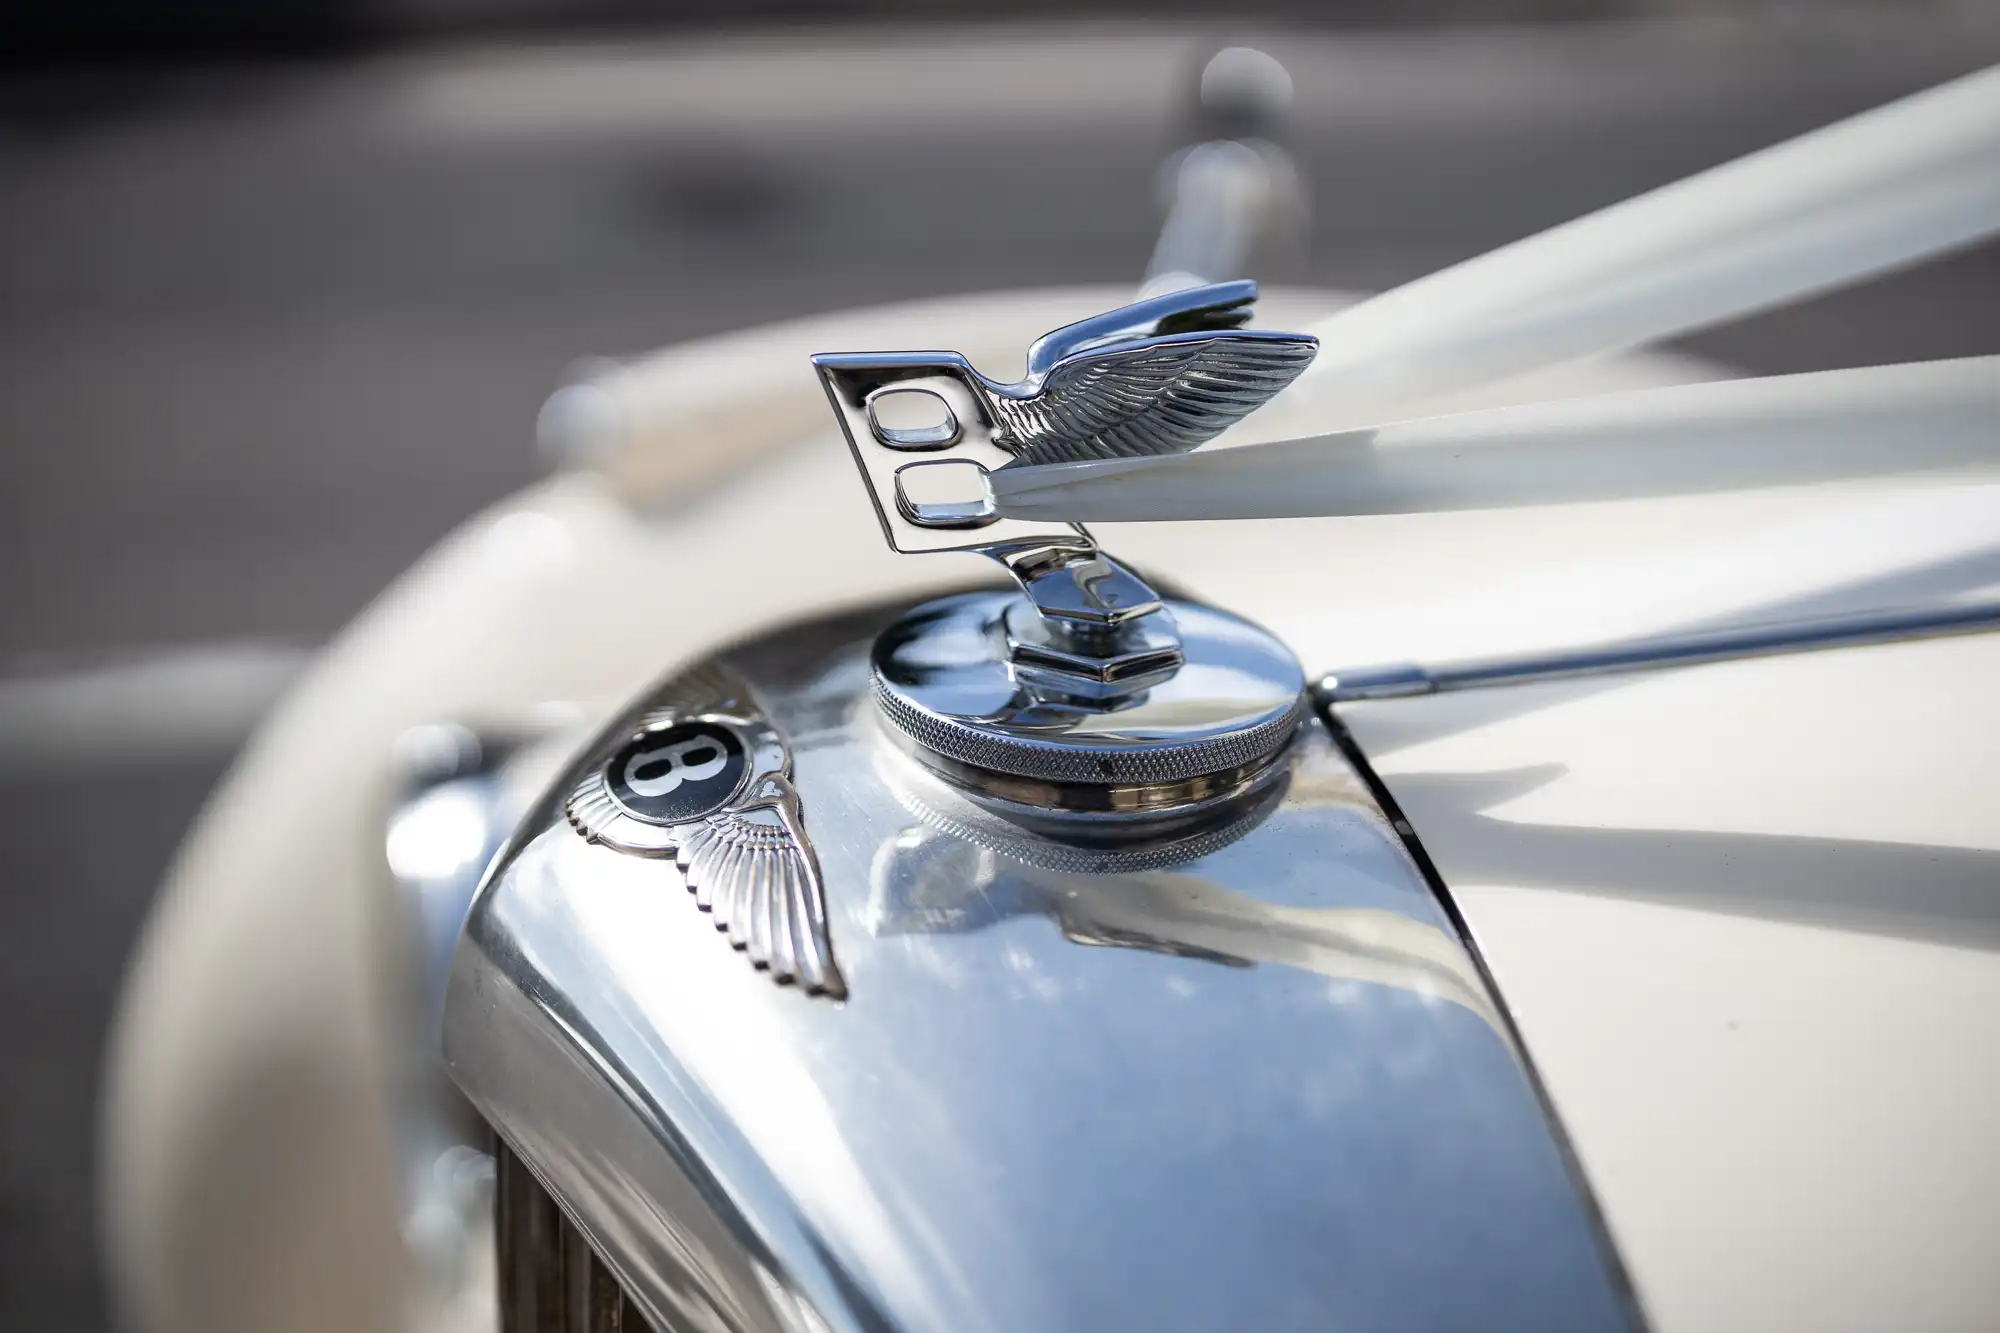 Close-up of a Bentley car's hood ornament and logo, featuring a pair of wings and the letter B, mounted on a chrome grille of a vintage car.